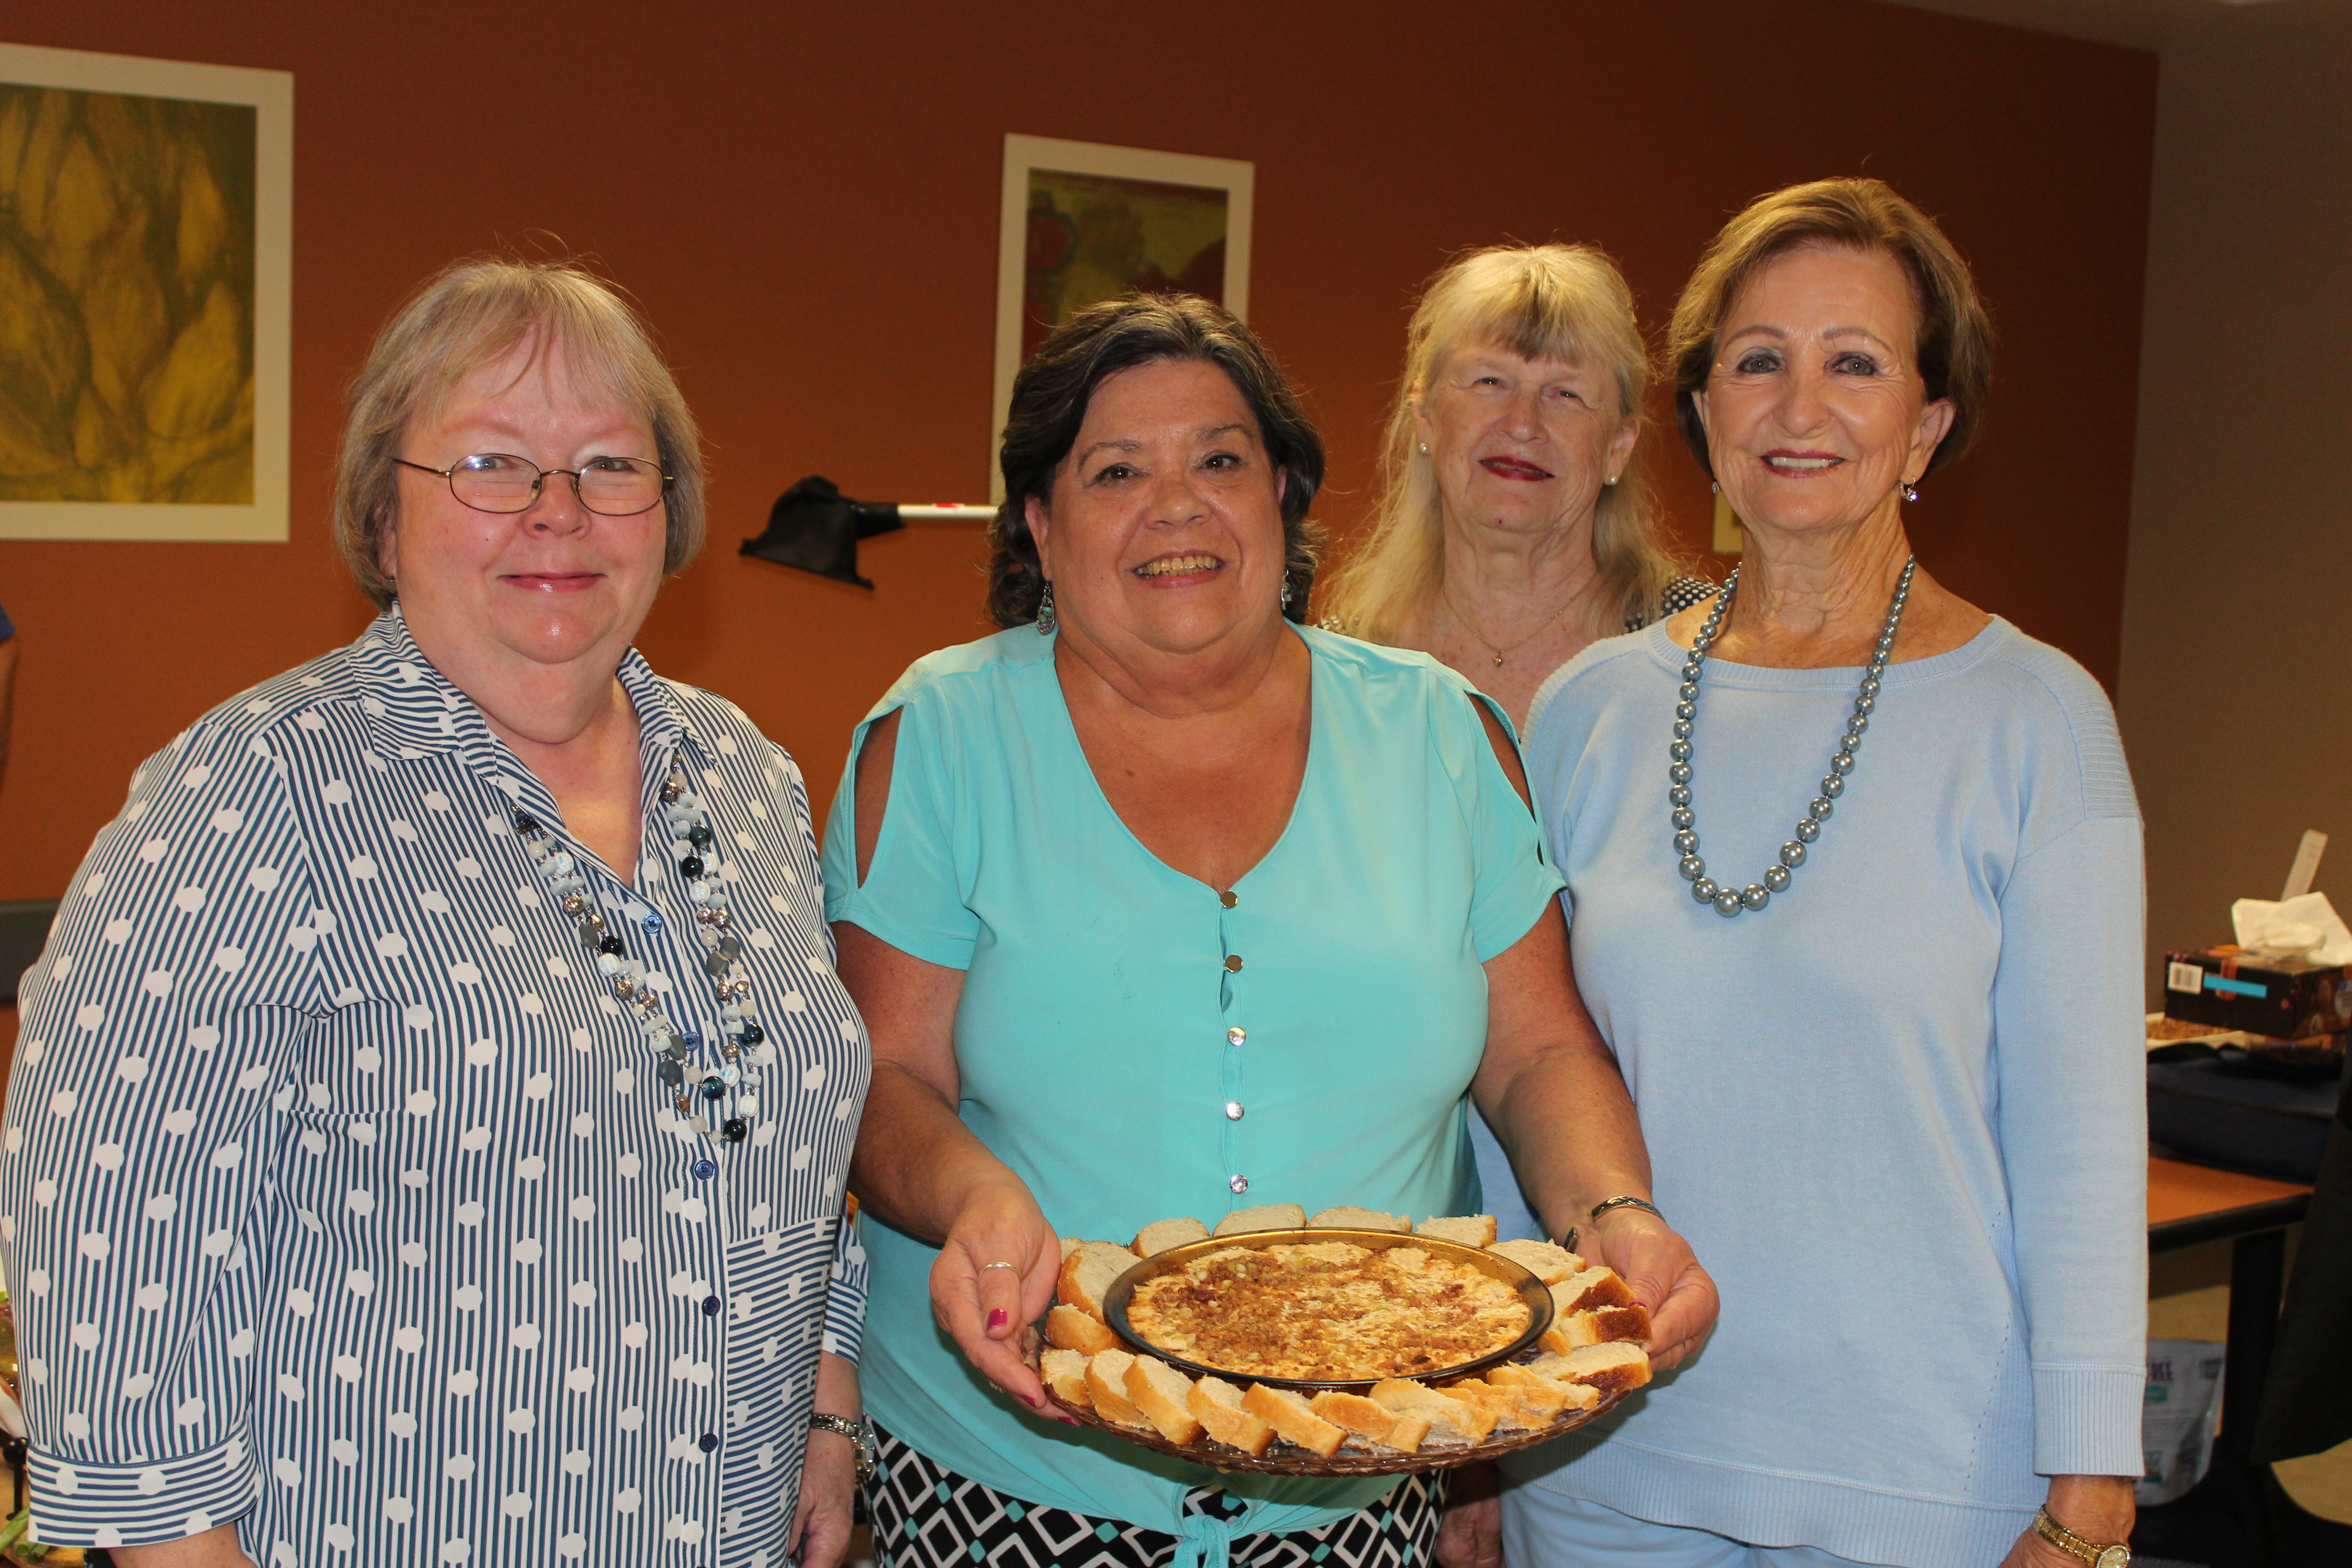 Barbara Whatley wins state 44th annual Heritage Cooking Contest